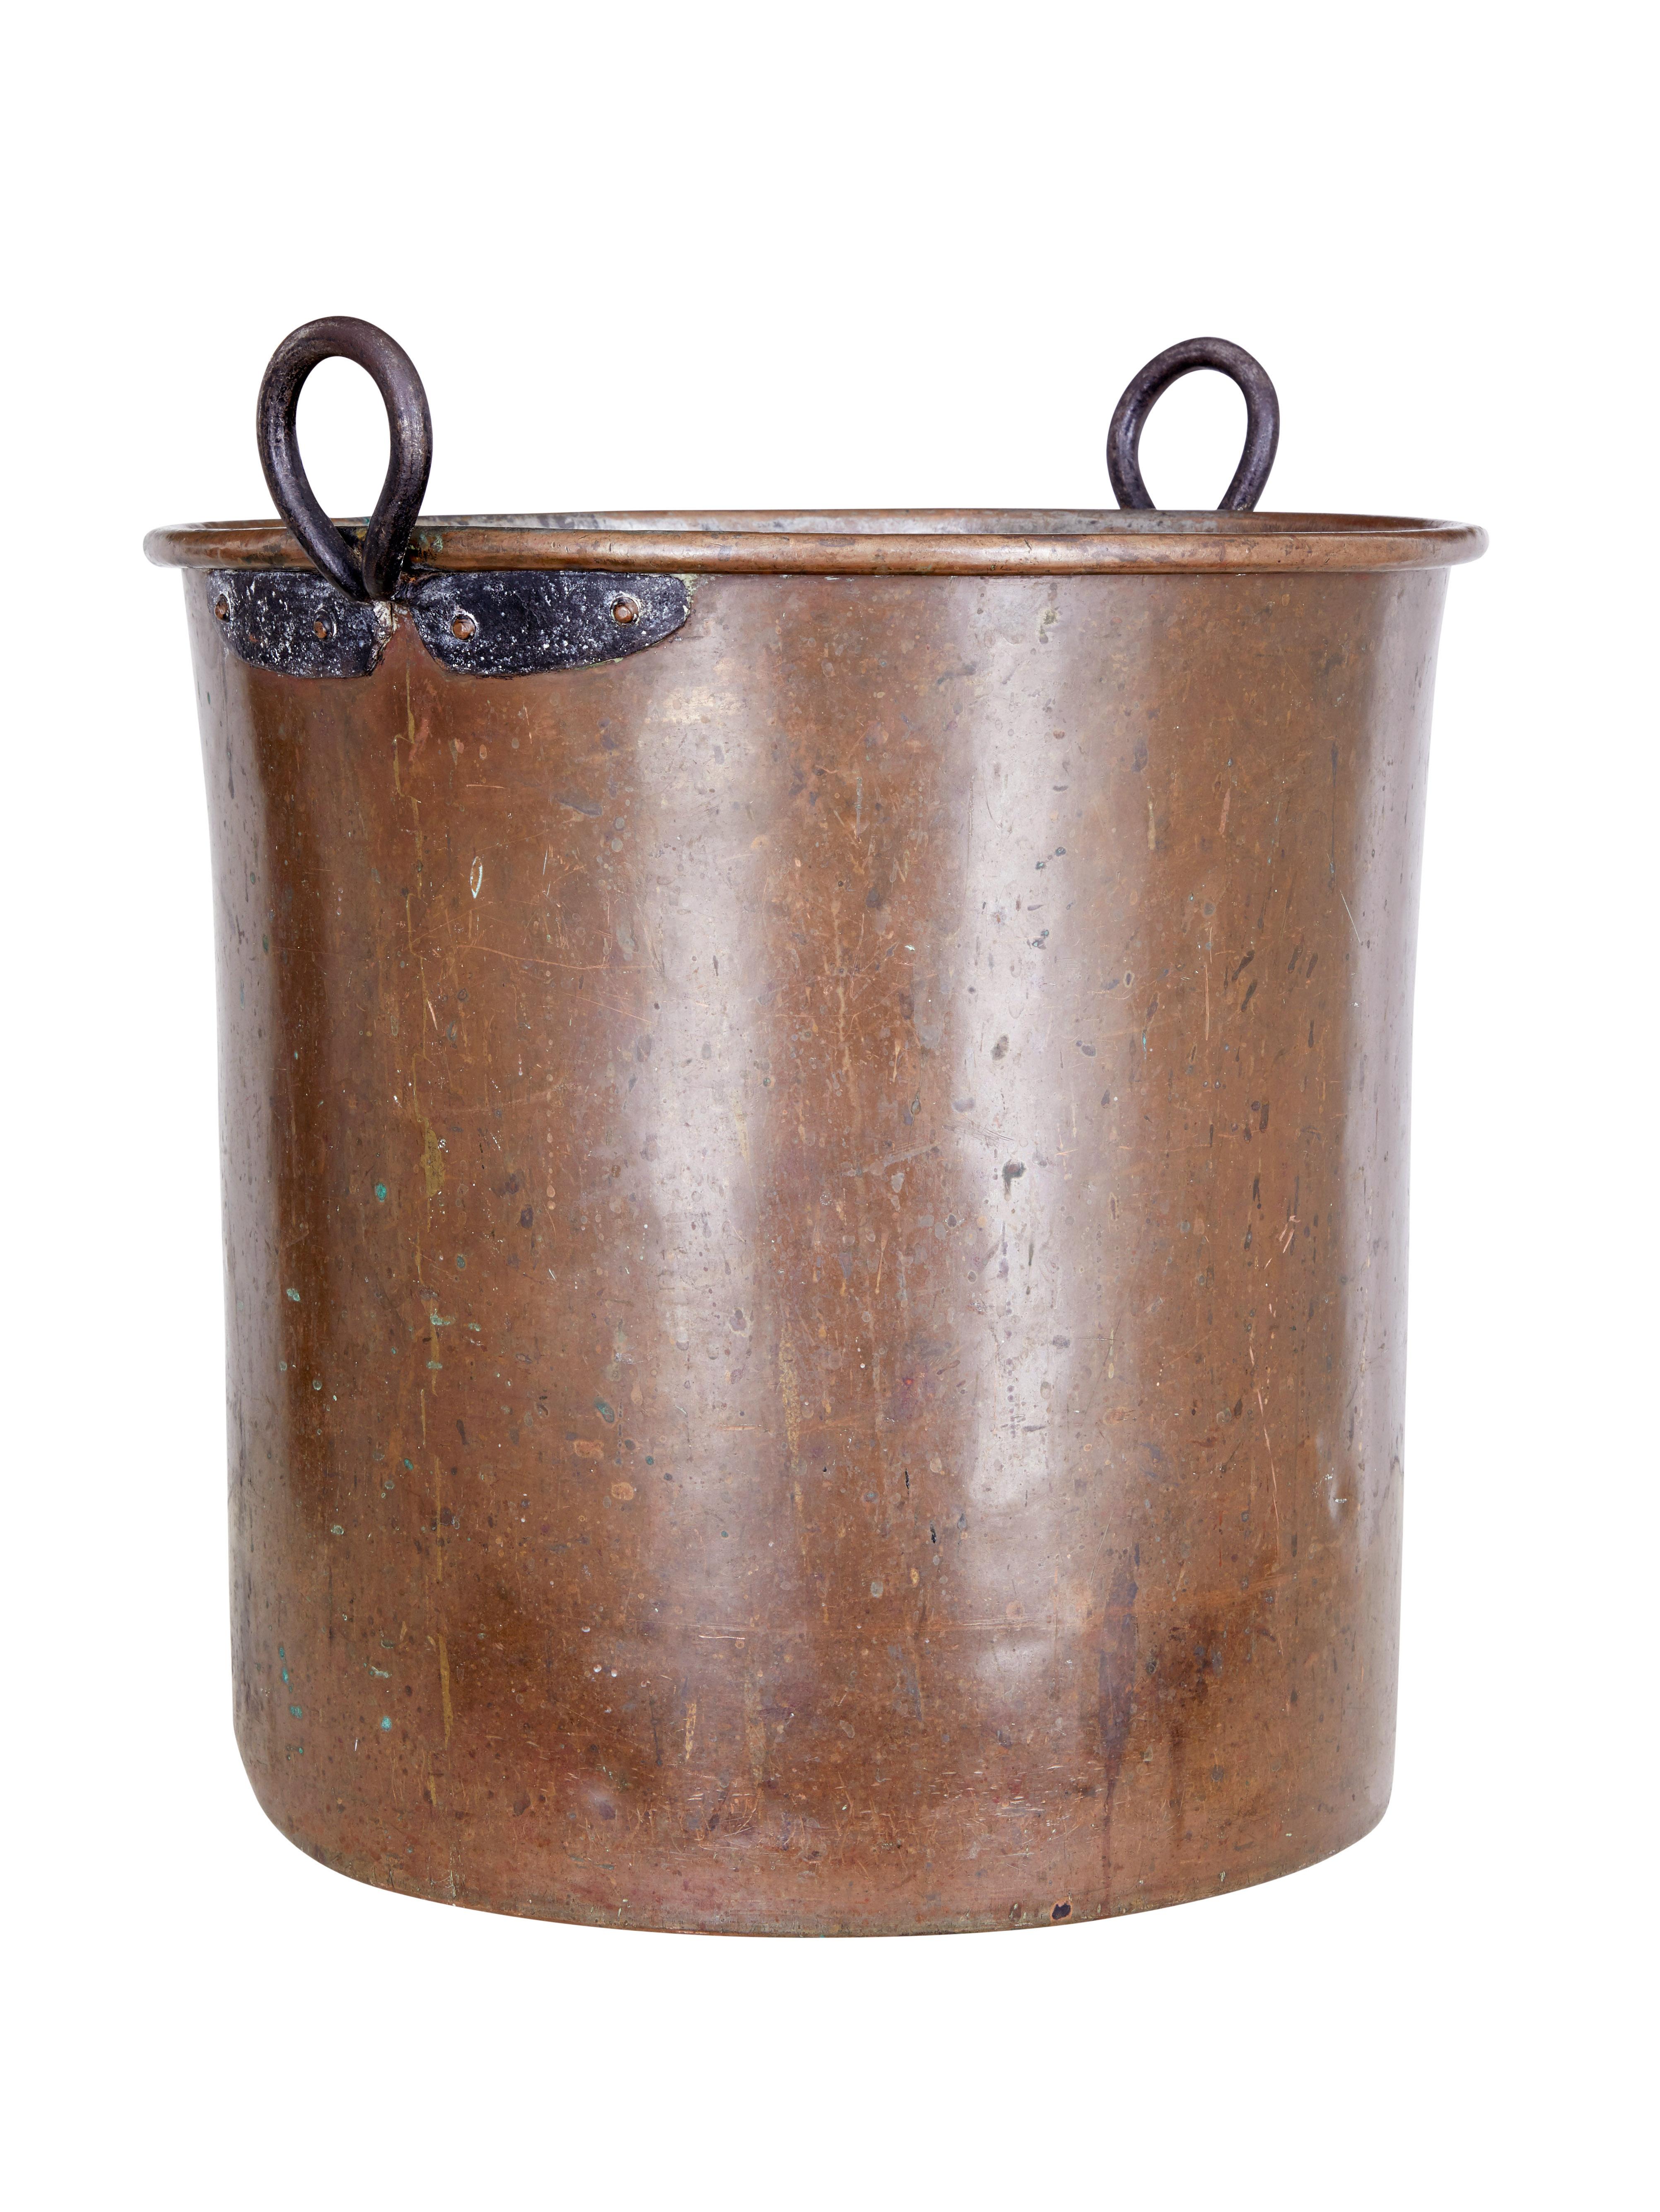 Large Arts & Crafts copper log bin circa 1890.

Likely to be a former milk churn, this impressive piece of metal work now minus its lid makes and ideal log bin or statement wastepaper basket.

Copper with steel handles fitted to the